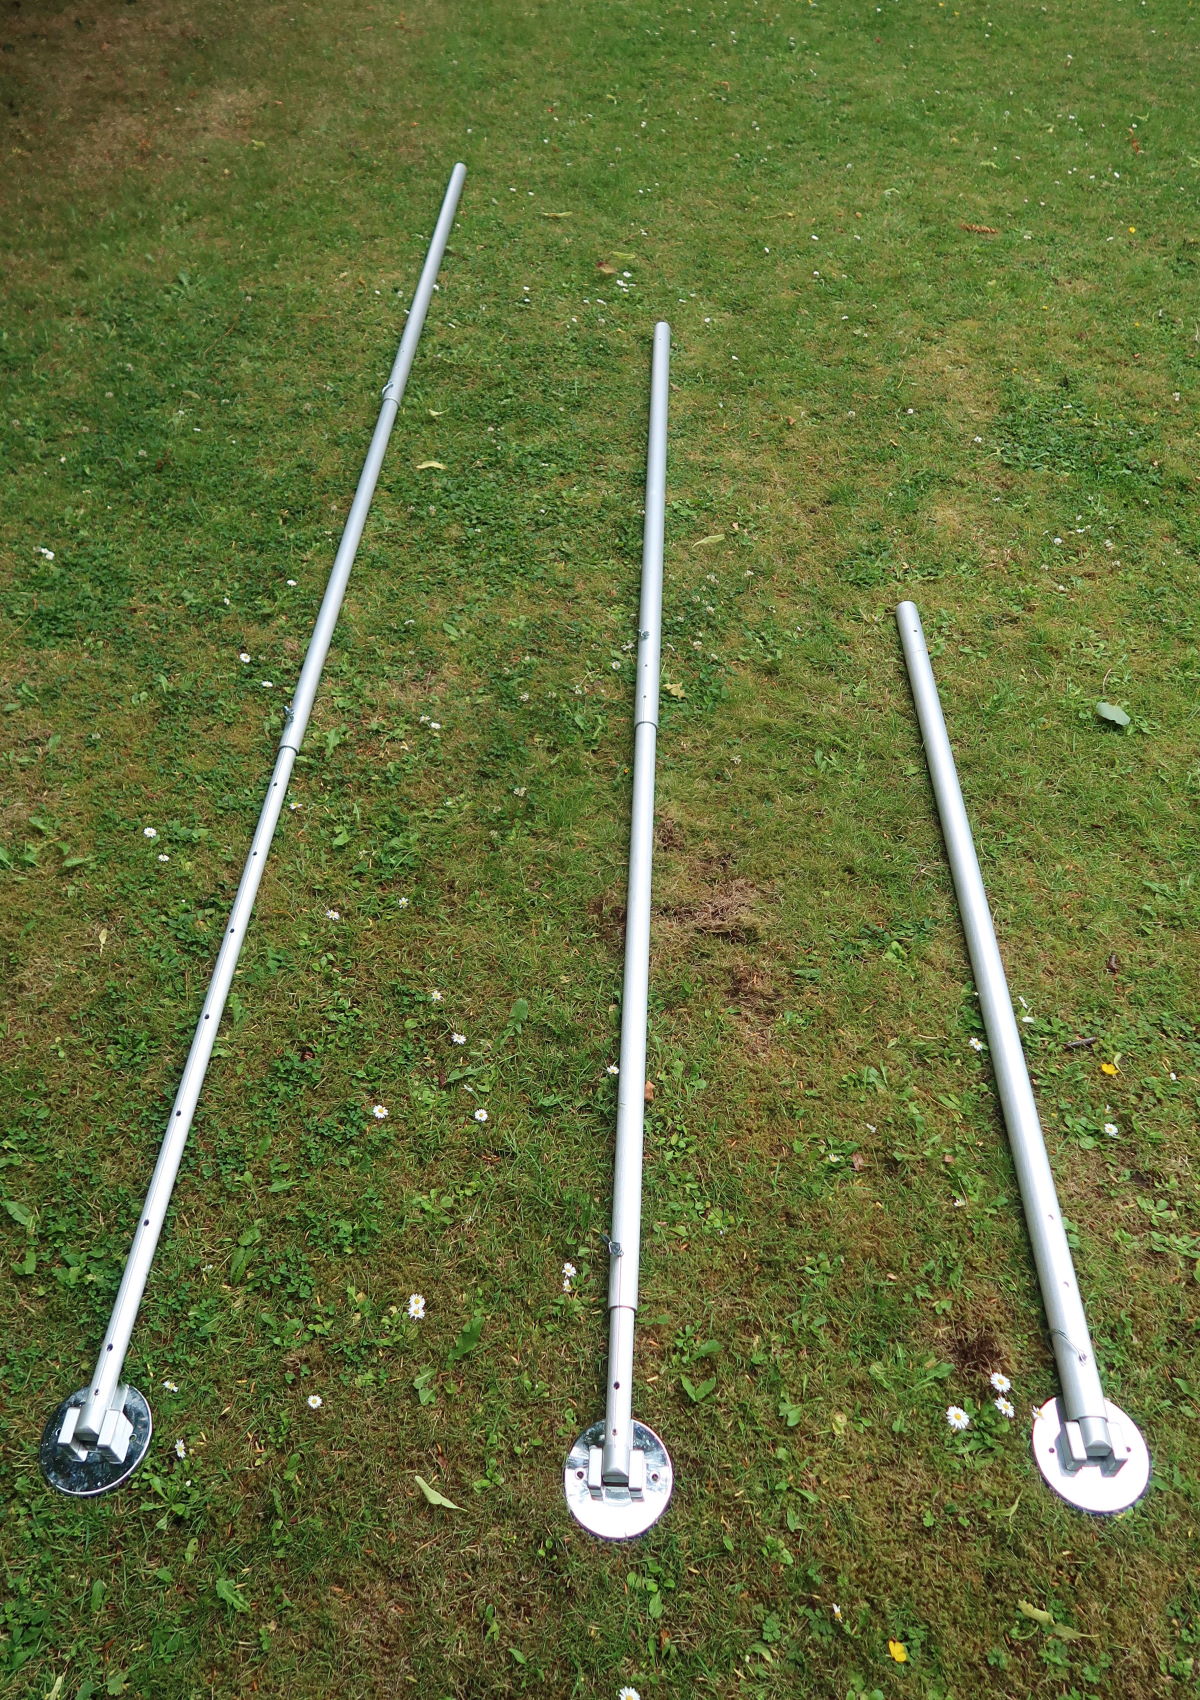 Uprights at full extension (360cm), minimum configured length (246.5cm) and packed for transport (146cm).